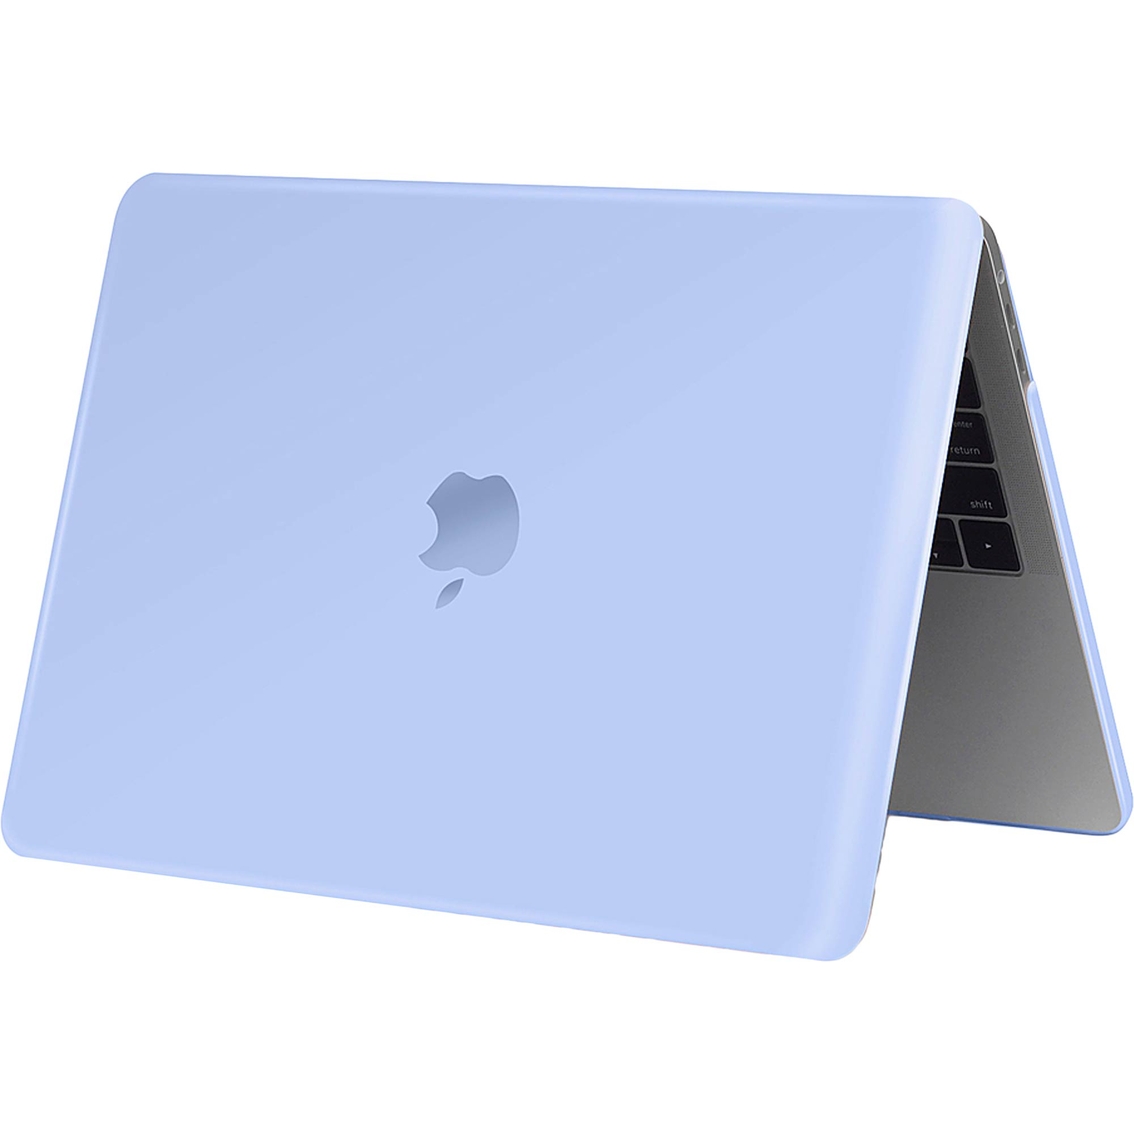 Techprotectus Hardshell Case for the 2020 and M1 2020 Macbook Air 13 in. - Image 2 of 2